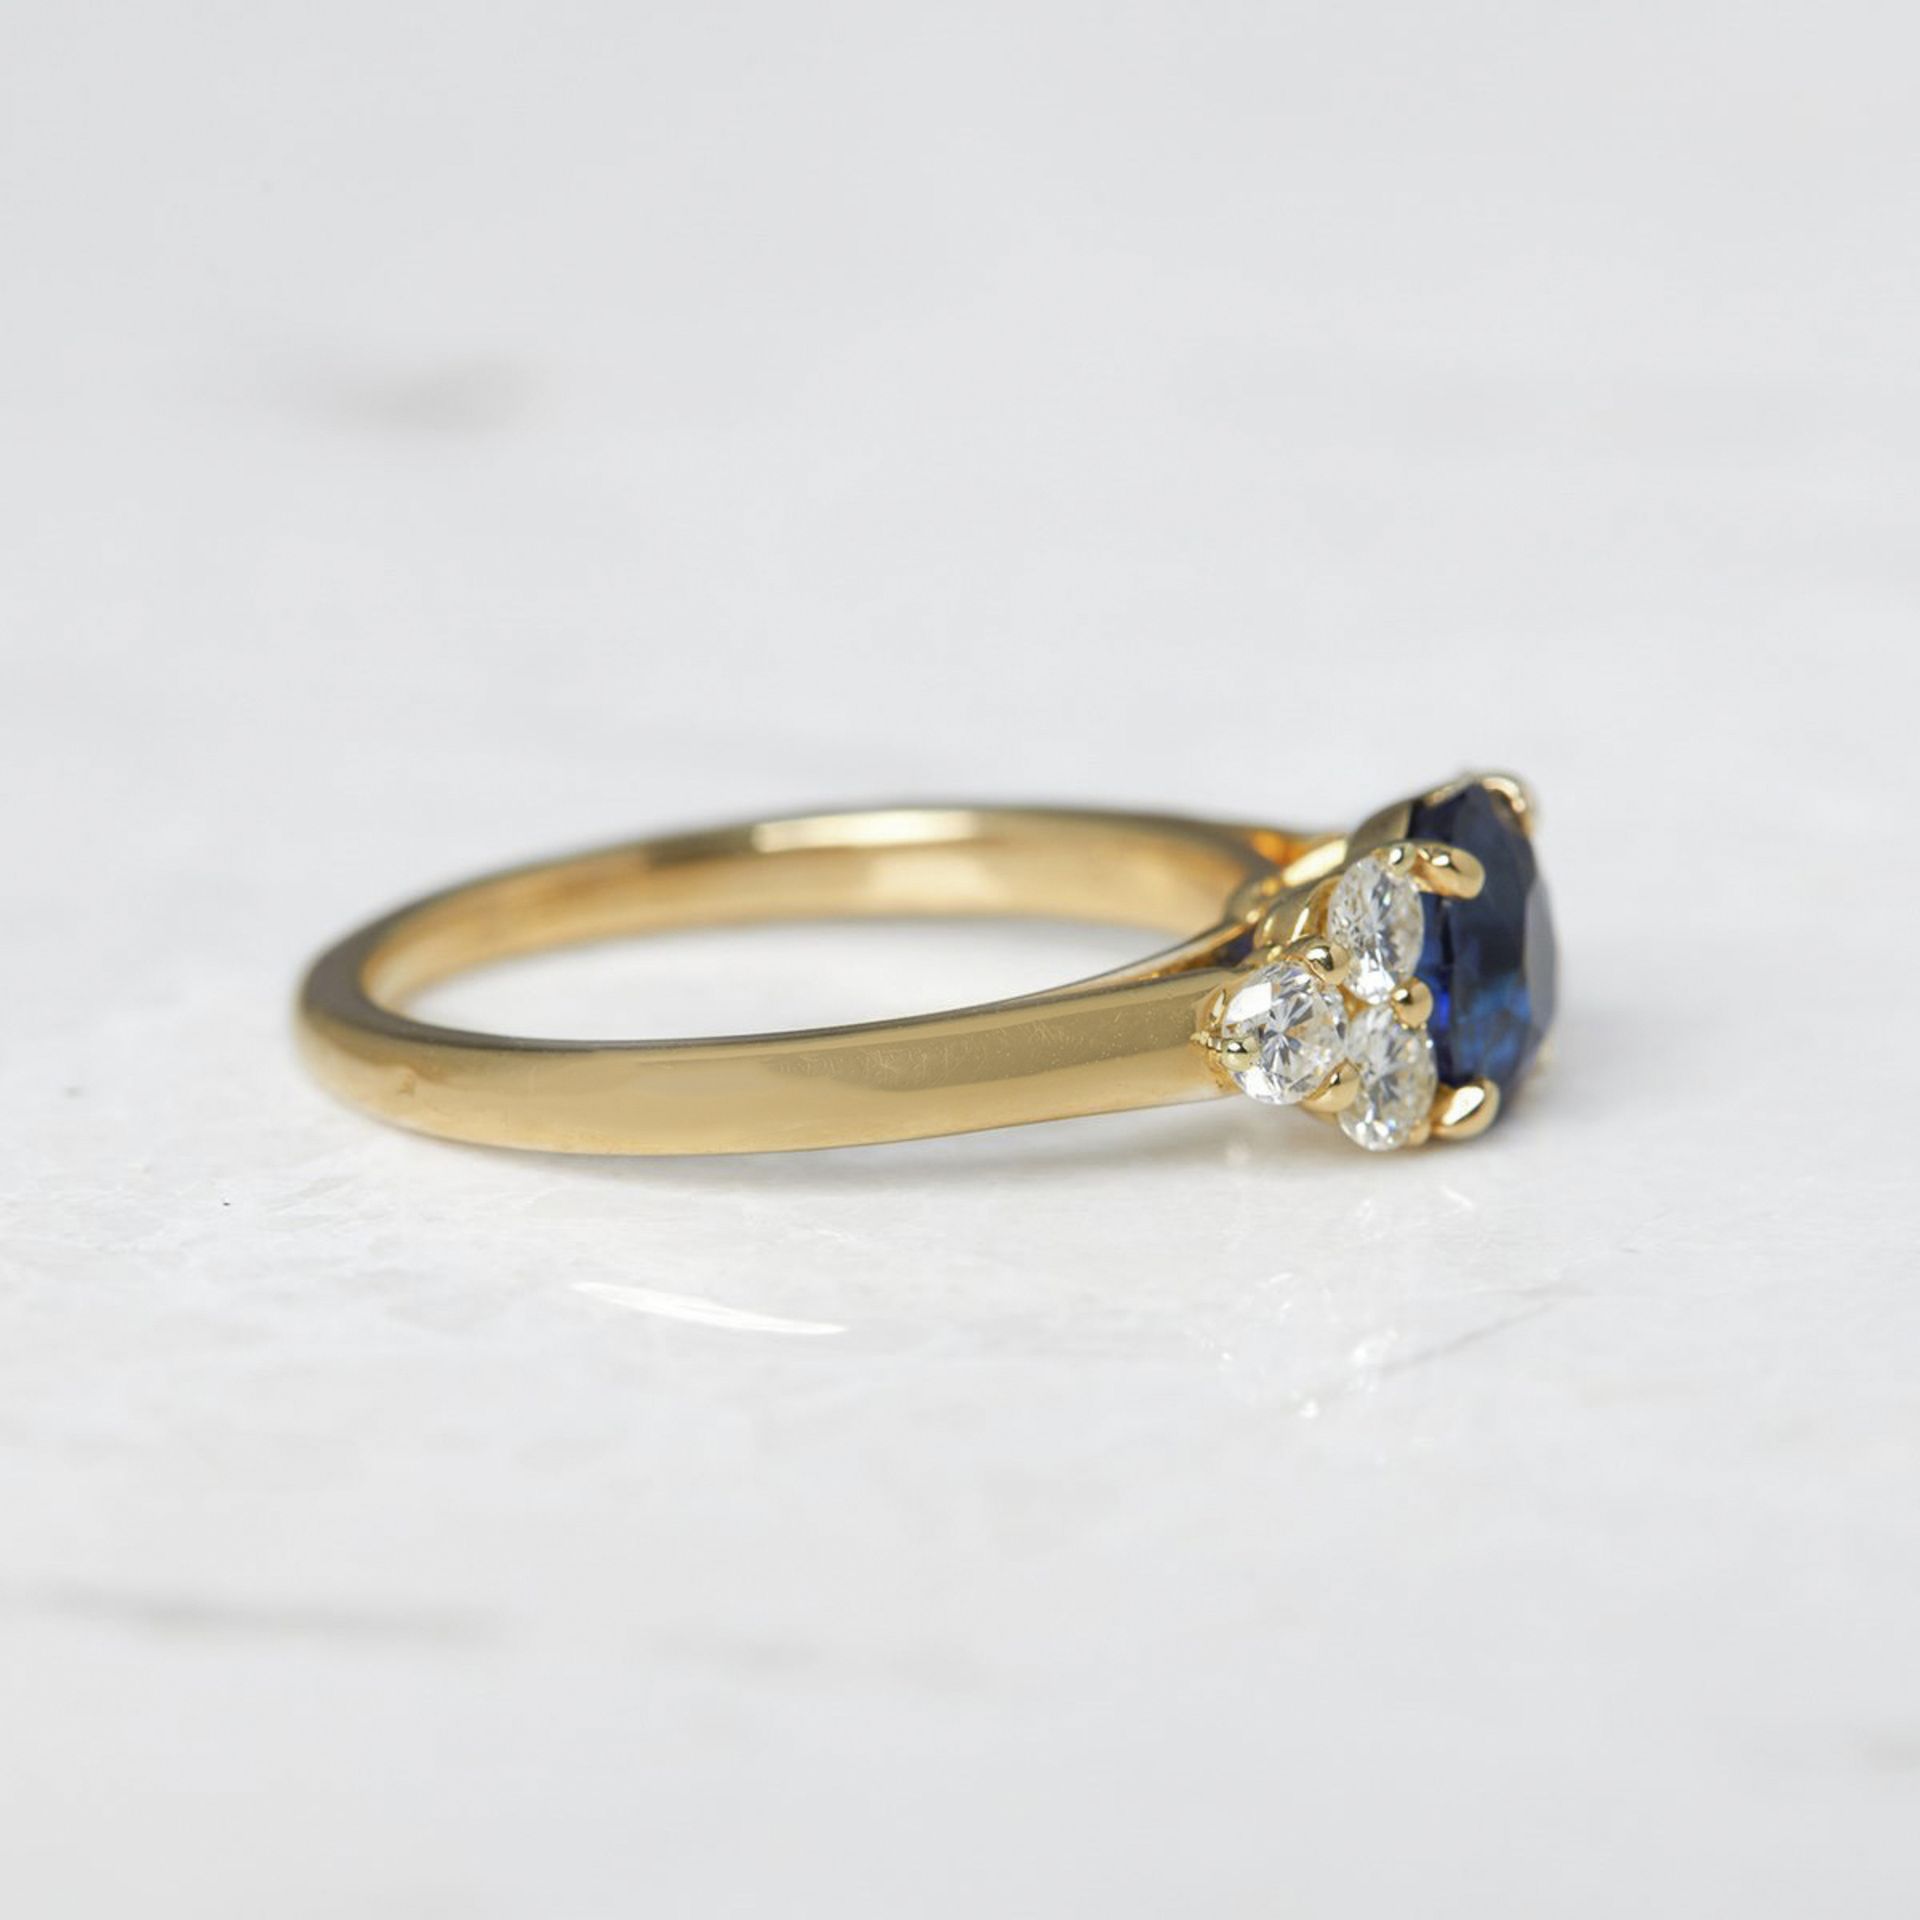 Cartier, 18k Yellow Gold 1.37ct Sapphire & 0.50ct Diamond Ring with Cartier Box & Cert / IGR Report - Image 3 of 12